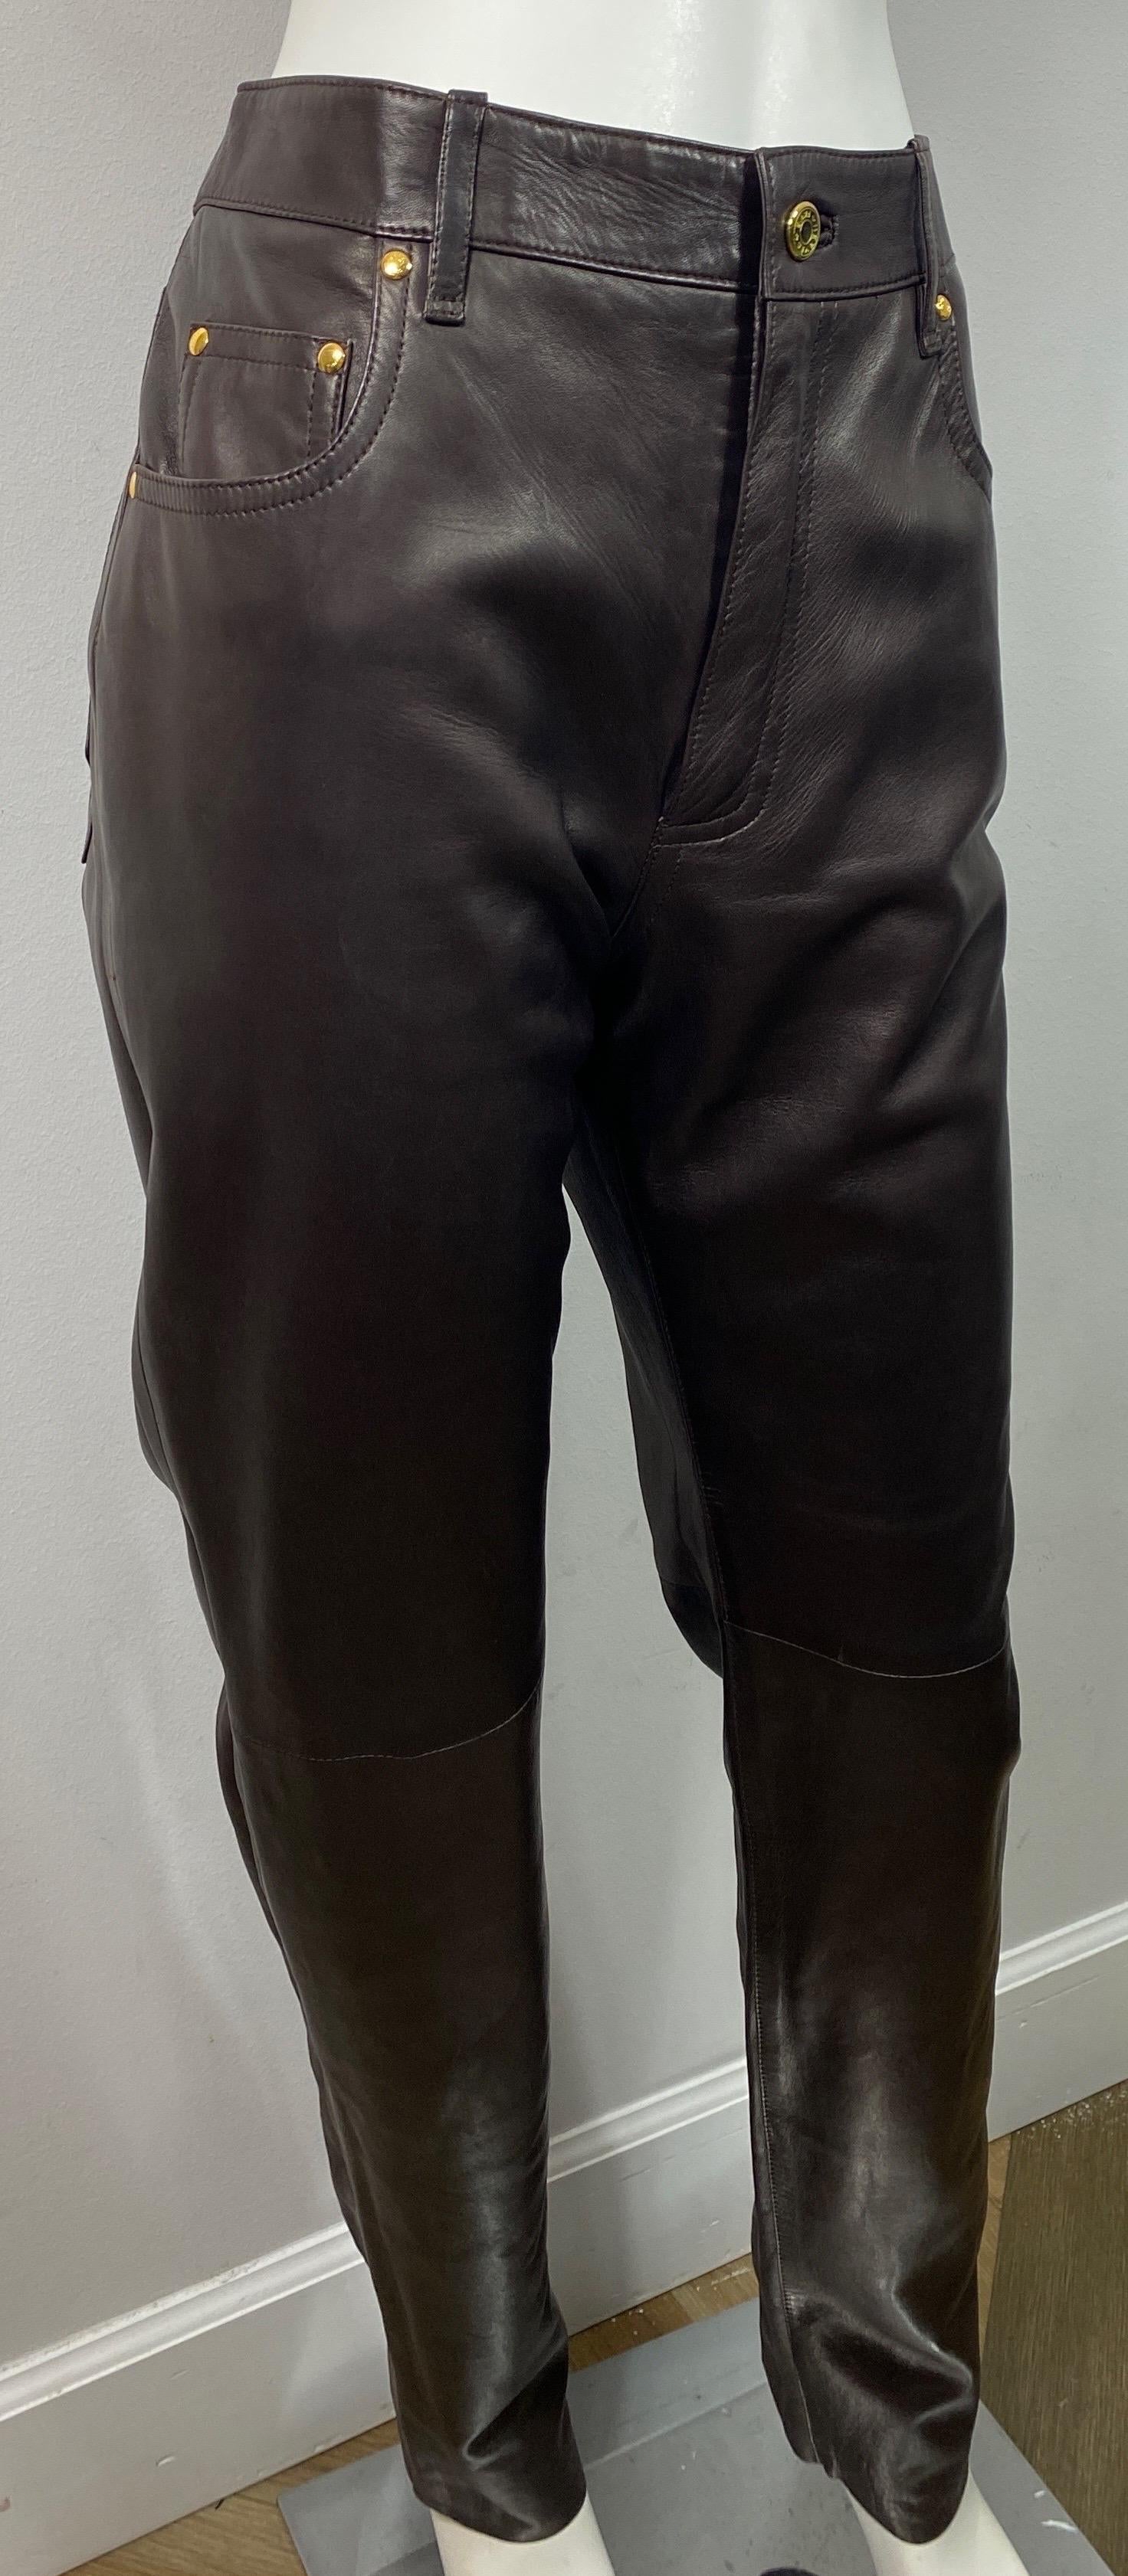 Women's Hermes 1990’s Vintage Chocolate Brown Jean Style Leather Pants - Size 42 For Sale